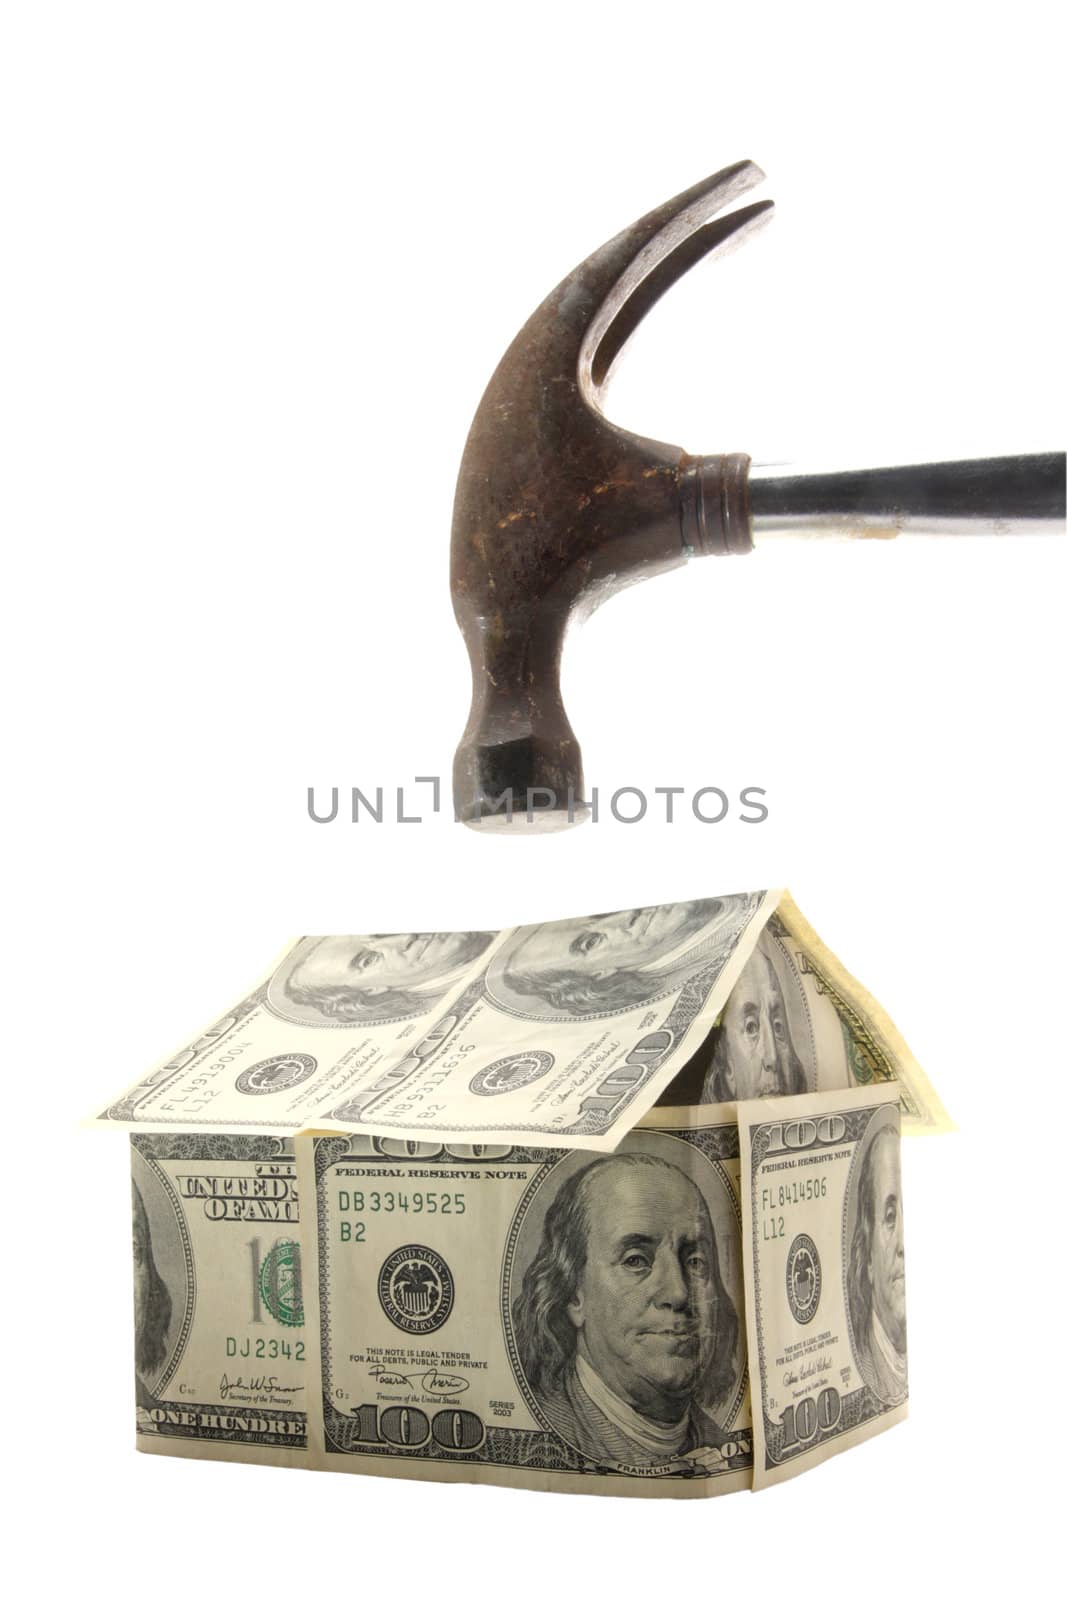 Hammer about to smash a home made out of US $100 bills - concept photo of home mortgage crisis